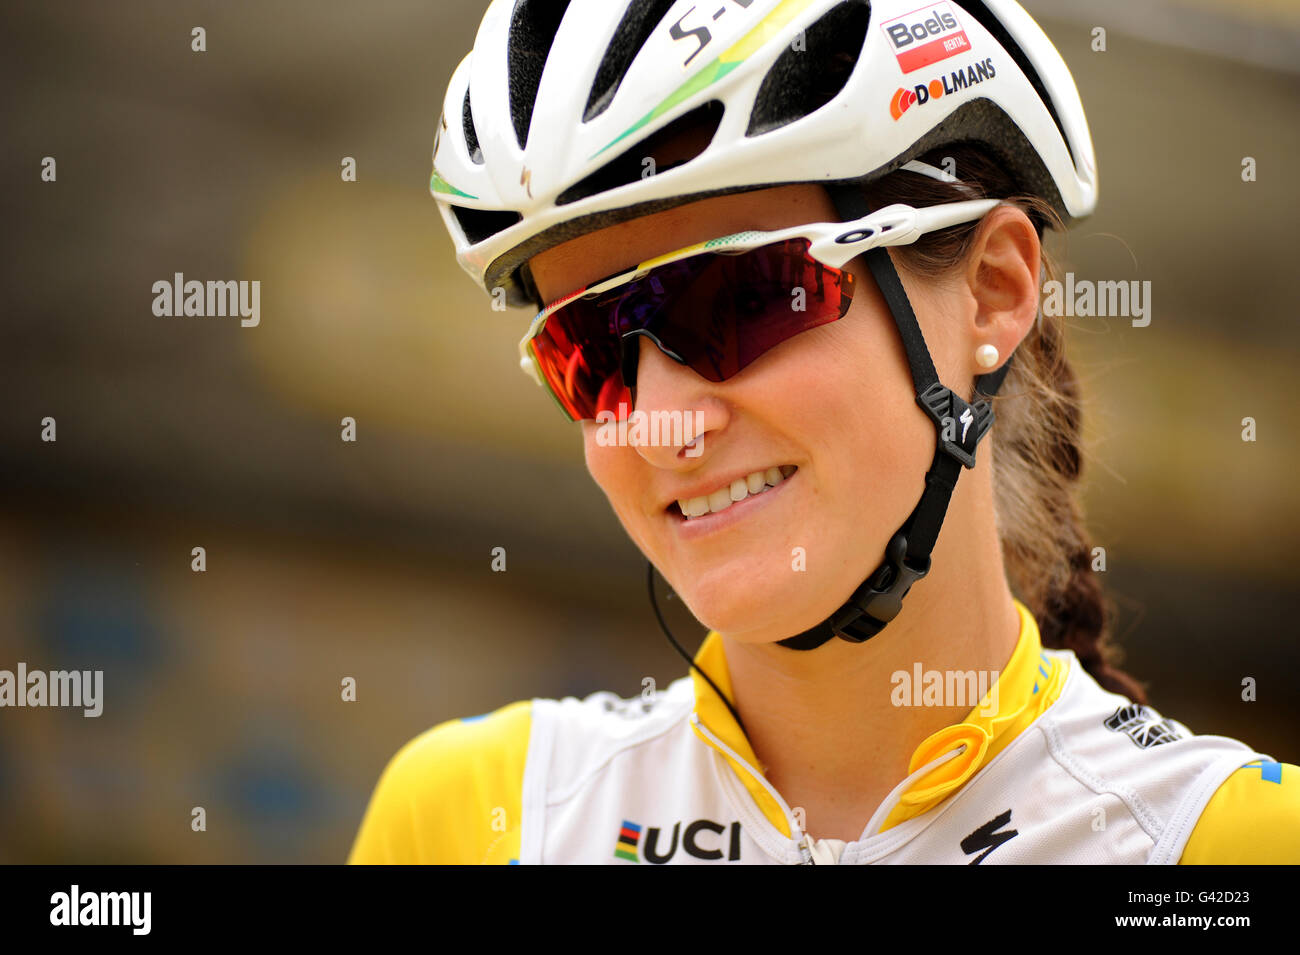 Nottingham to Stoke-on-Trent, UK. 18th June, 2016. Aviva Women's Tour Stage 4. Race leader Lizzie Armitstead (GBR) of Boels Dolmans Cycling Team before the start of the race. @ Credit:  David Partridge/Alamy Live News Stock Photo